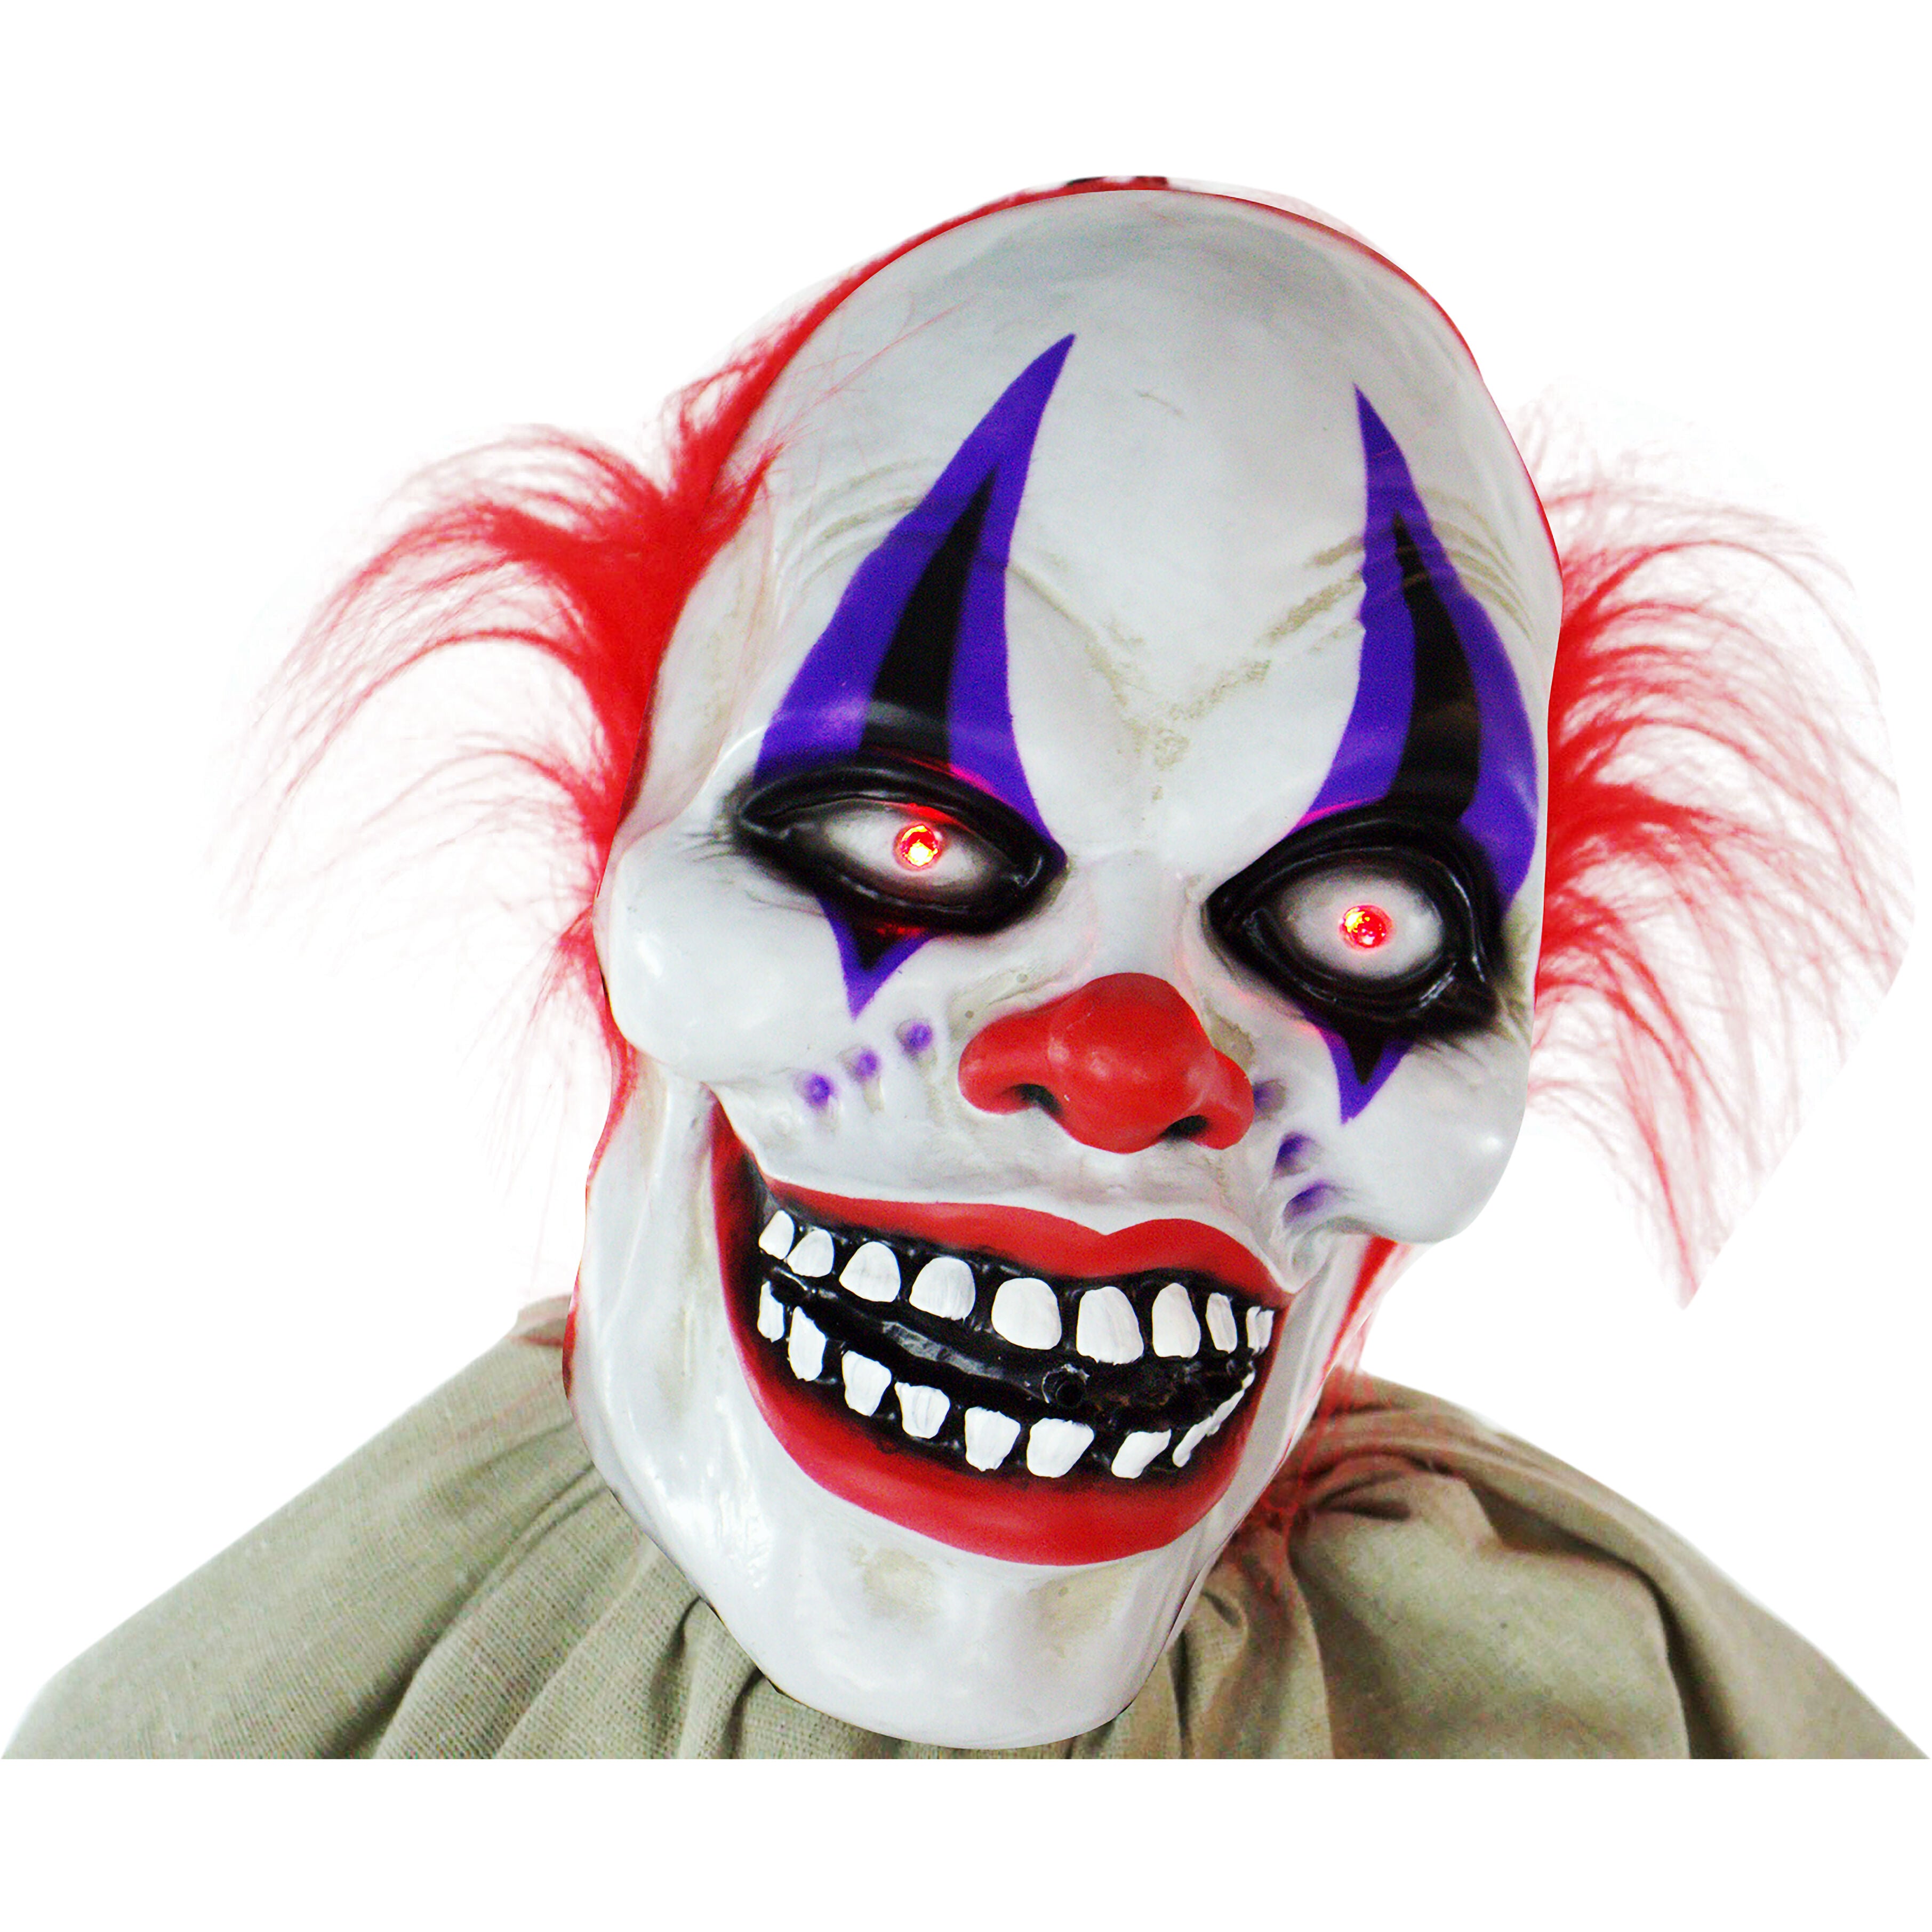 Haunted Hill Farm -  5-Ft. Frans the Talking Animatronic Clown, Indoor or Covered Outdoor Halloween Decoration, Red LED Eyes